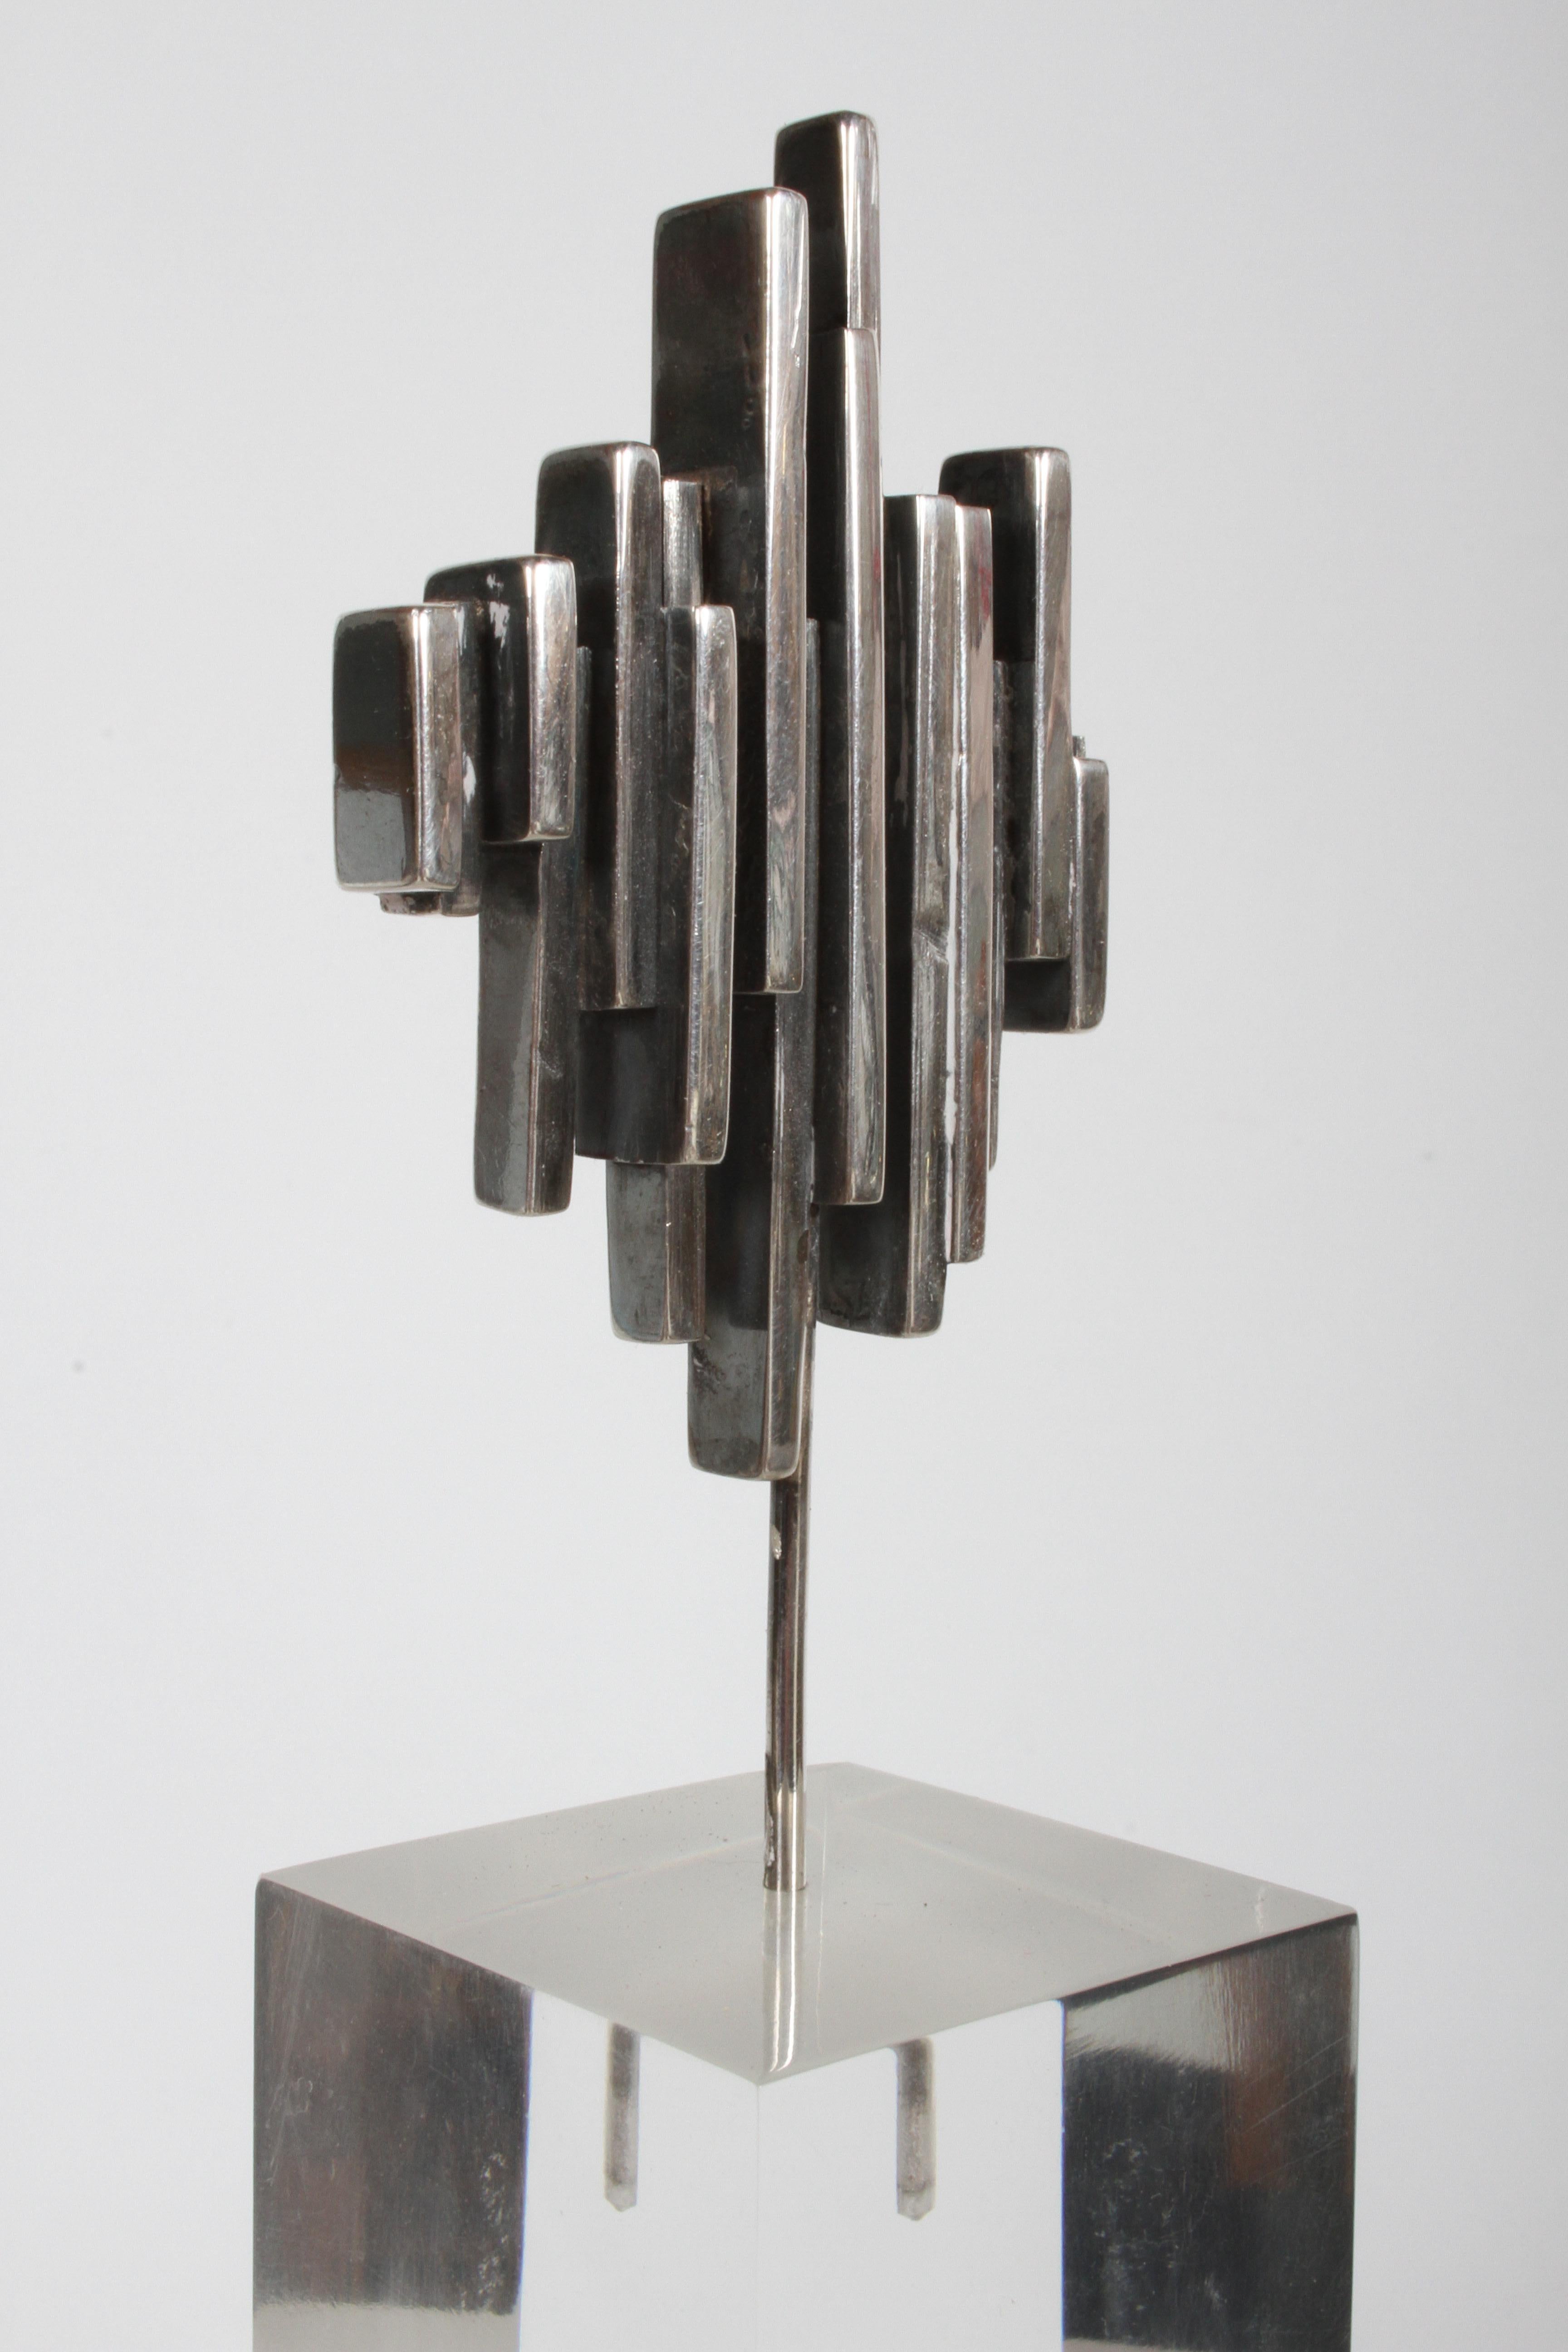 R.W. Smith signed and dated 1971 sterling silver mini abstract sculpture on lucite base. Lucite cube base has one slight blemish to top edge, otherwise nice vintage condition, with light surface scuffs. Lucite base is 4